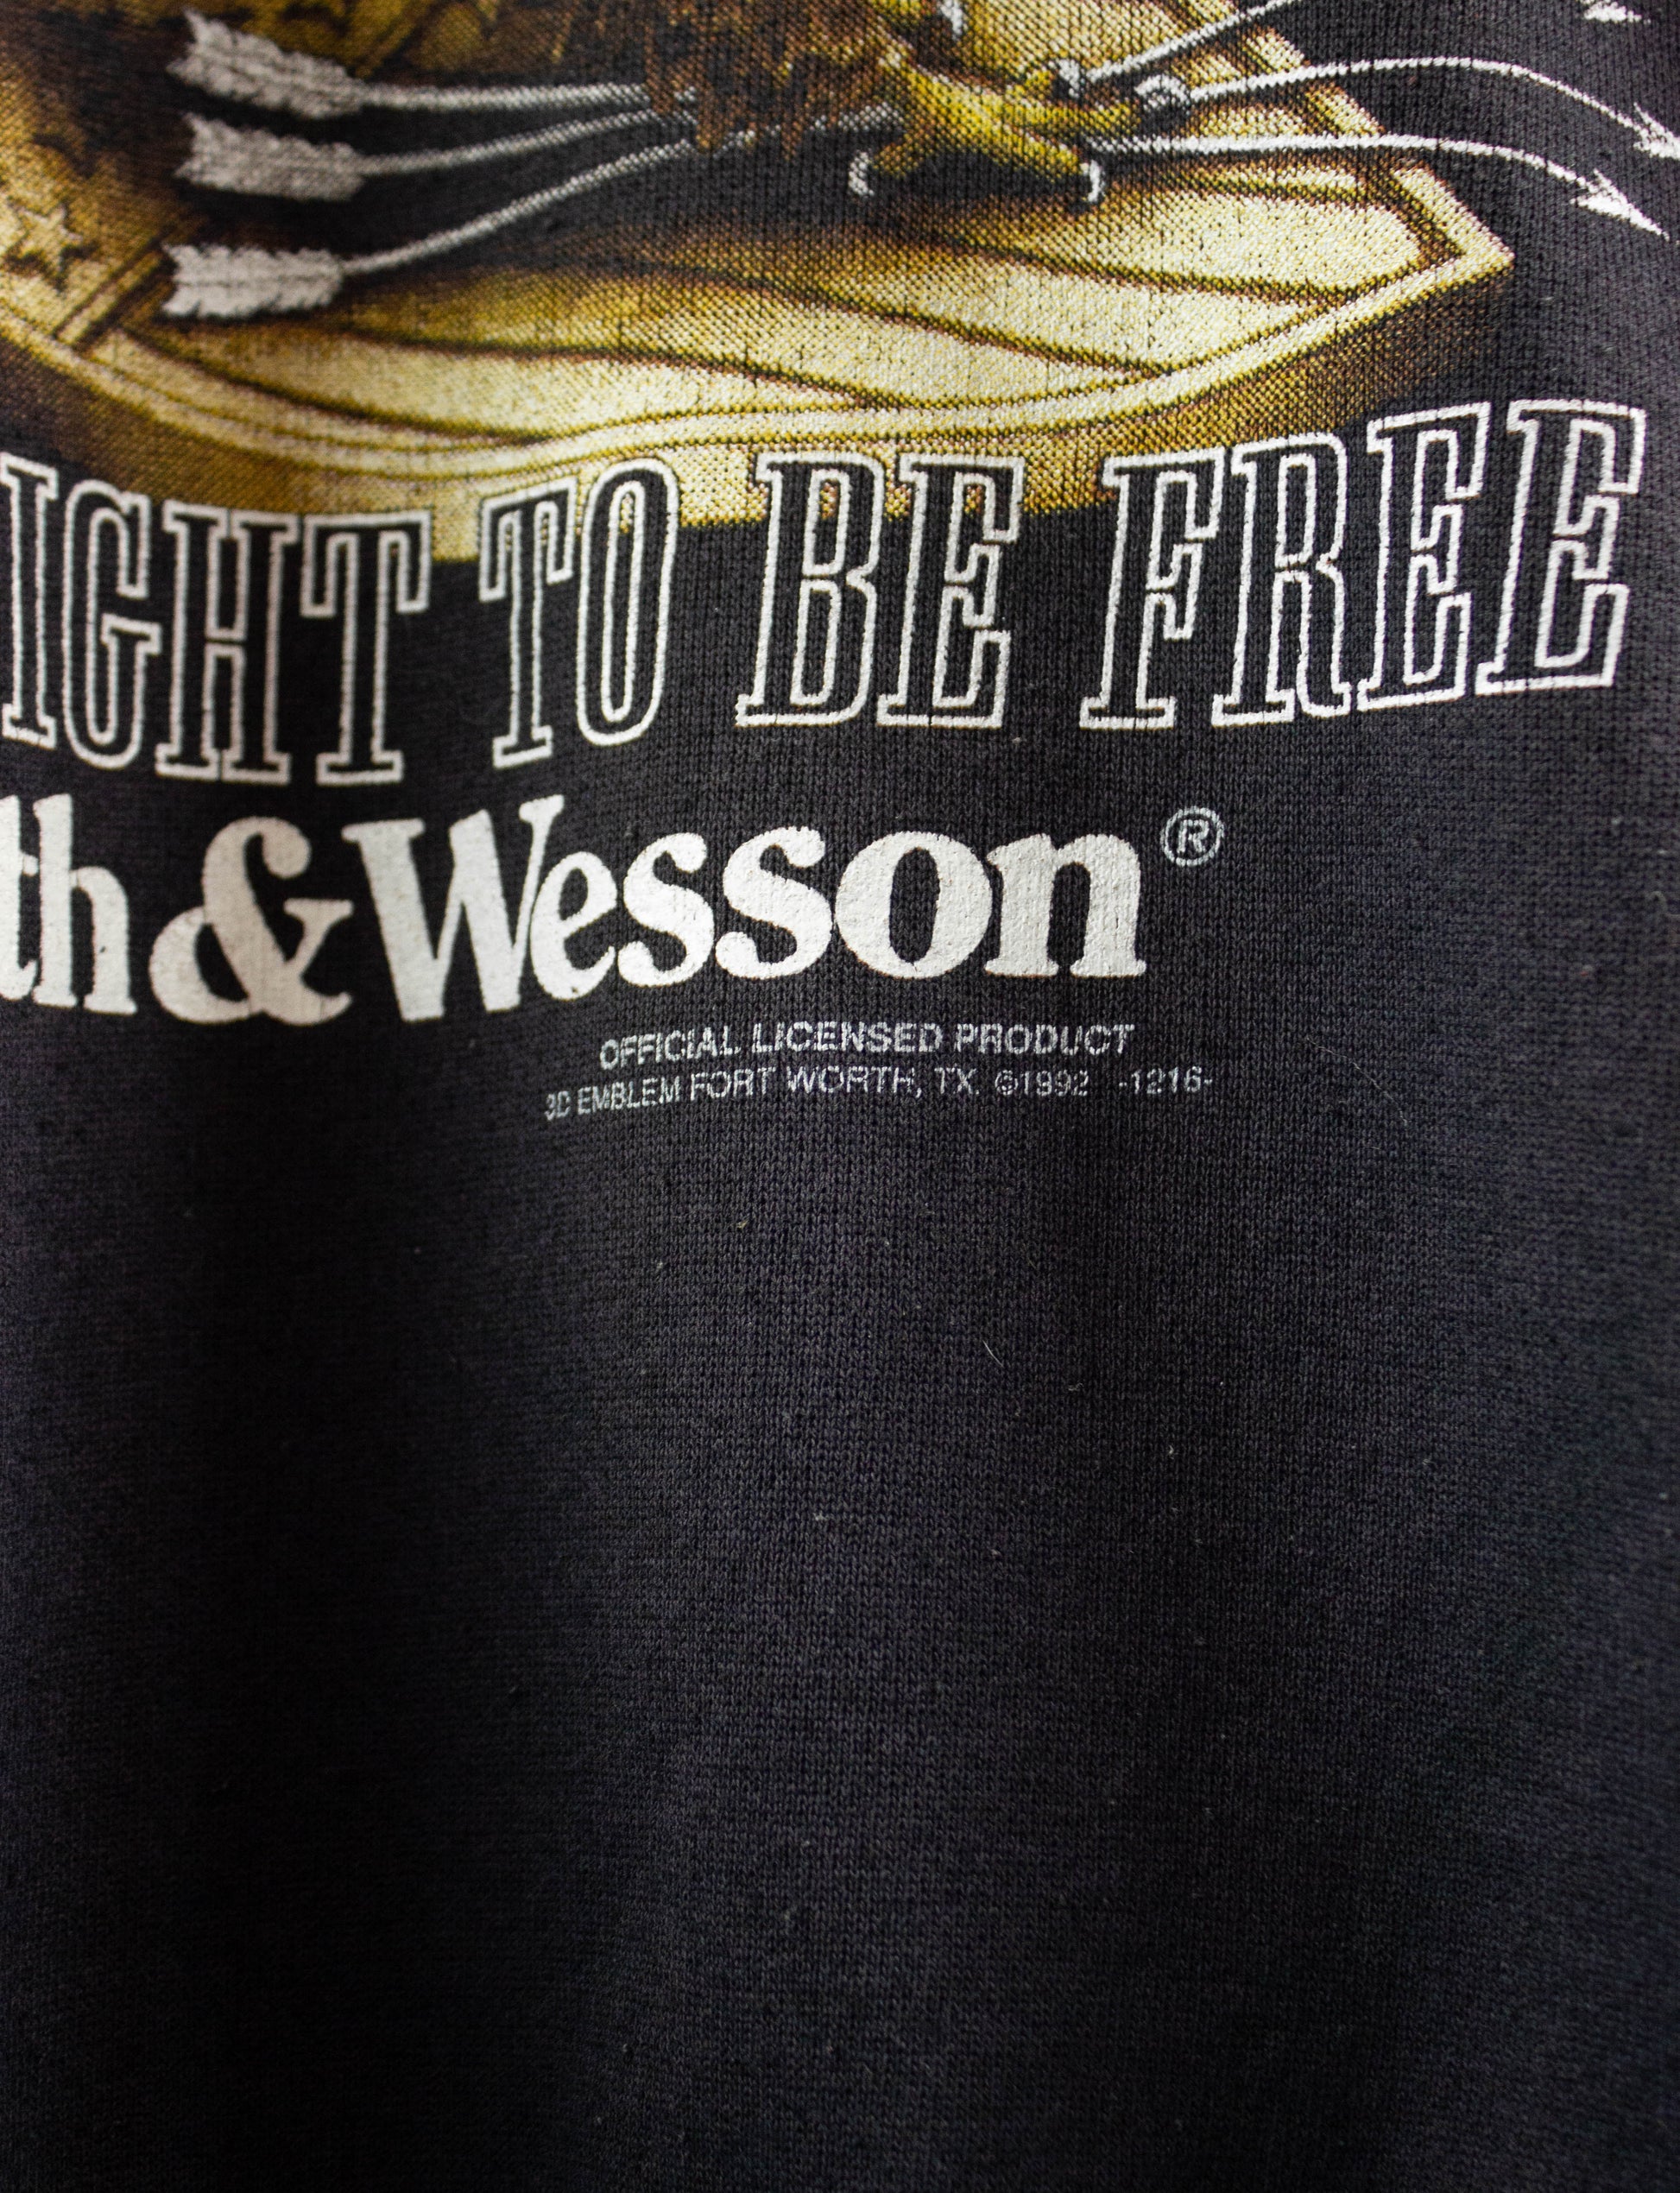 Vintage Smith & Wesson 3D Emblem Graphic Crewneck Sweatshirt 1992 The Right To Bear Arms Is The Right To Be Free Faded Black Medium